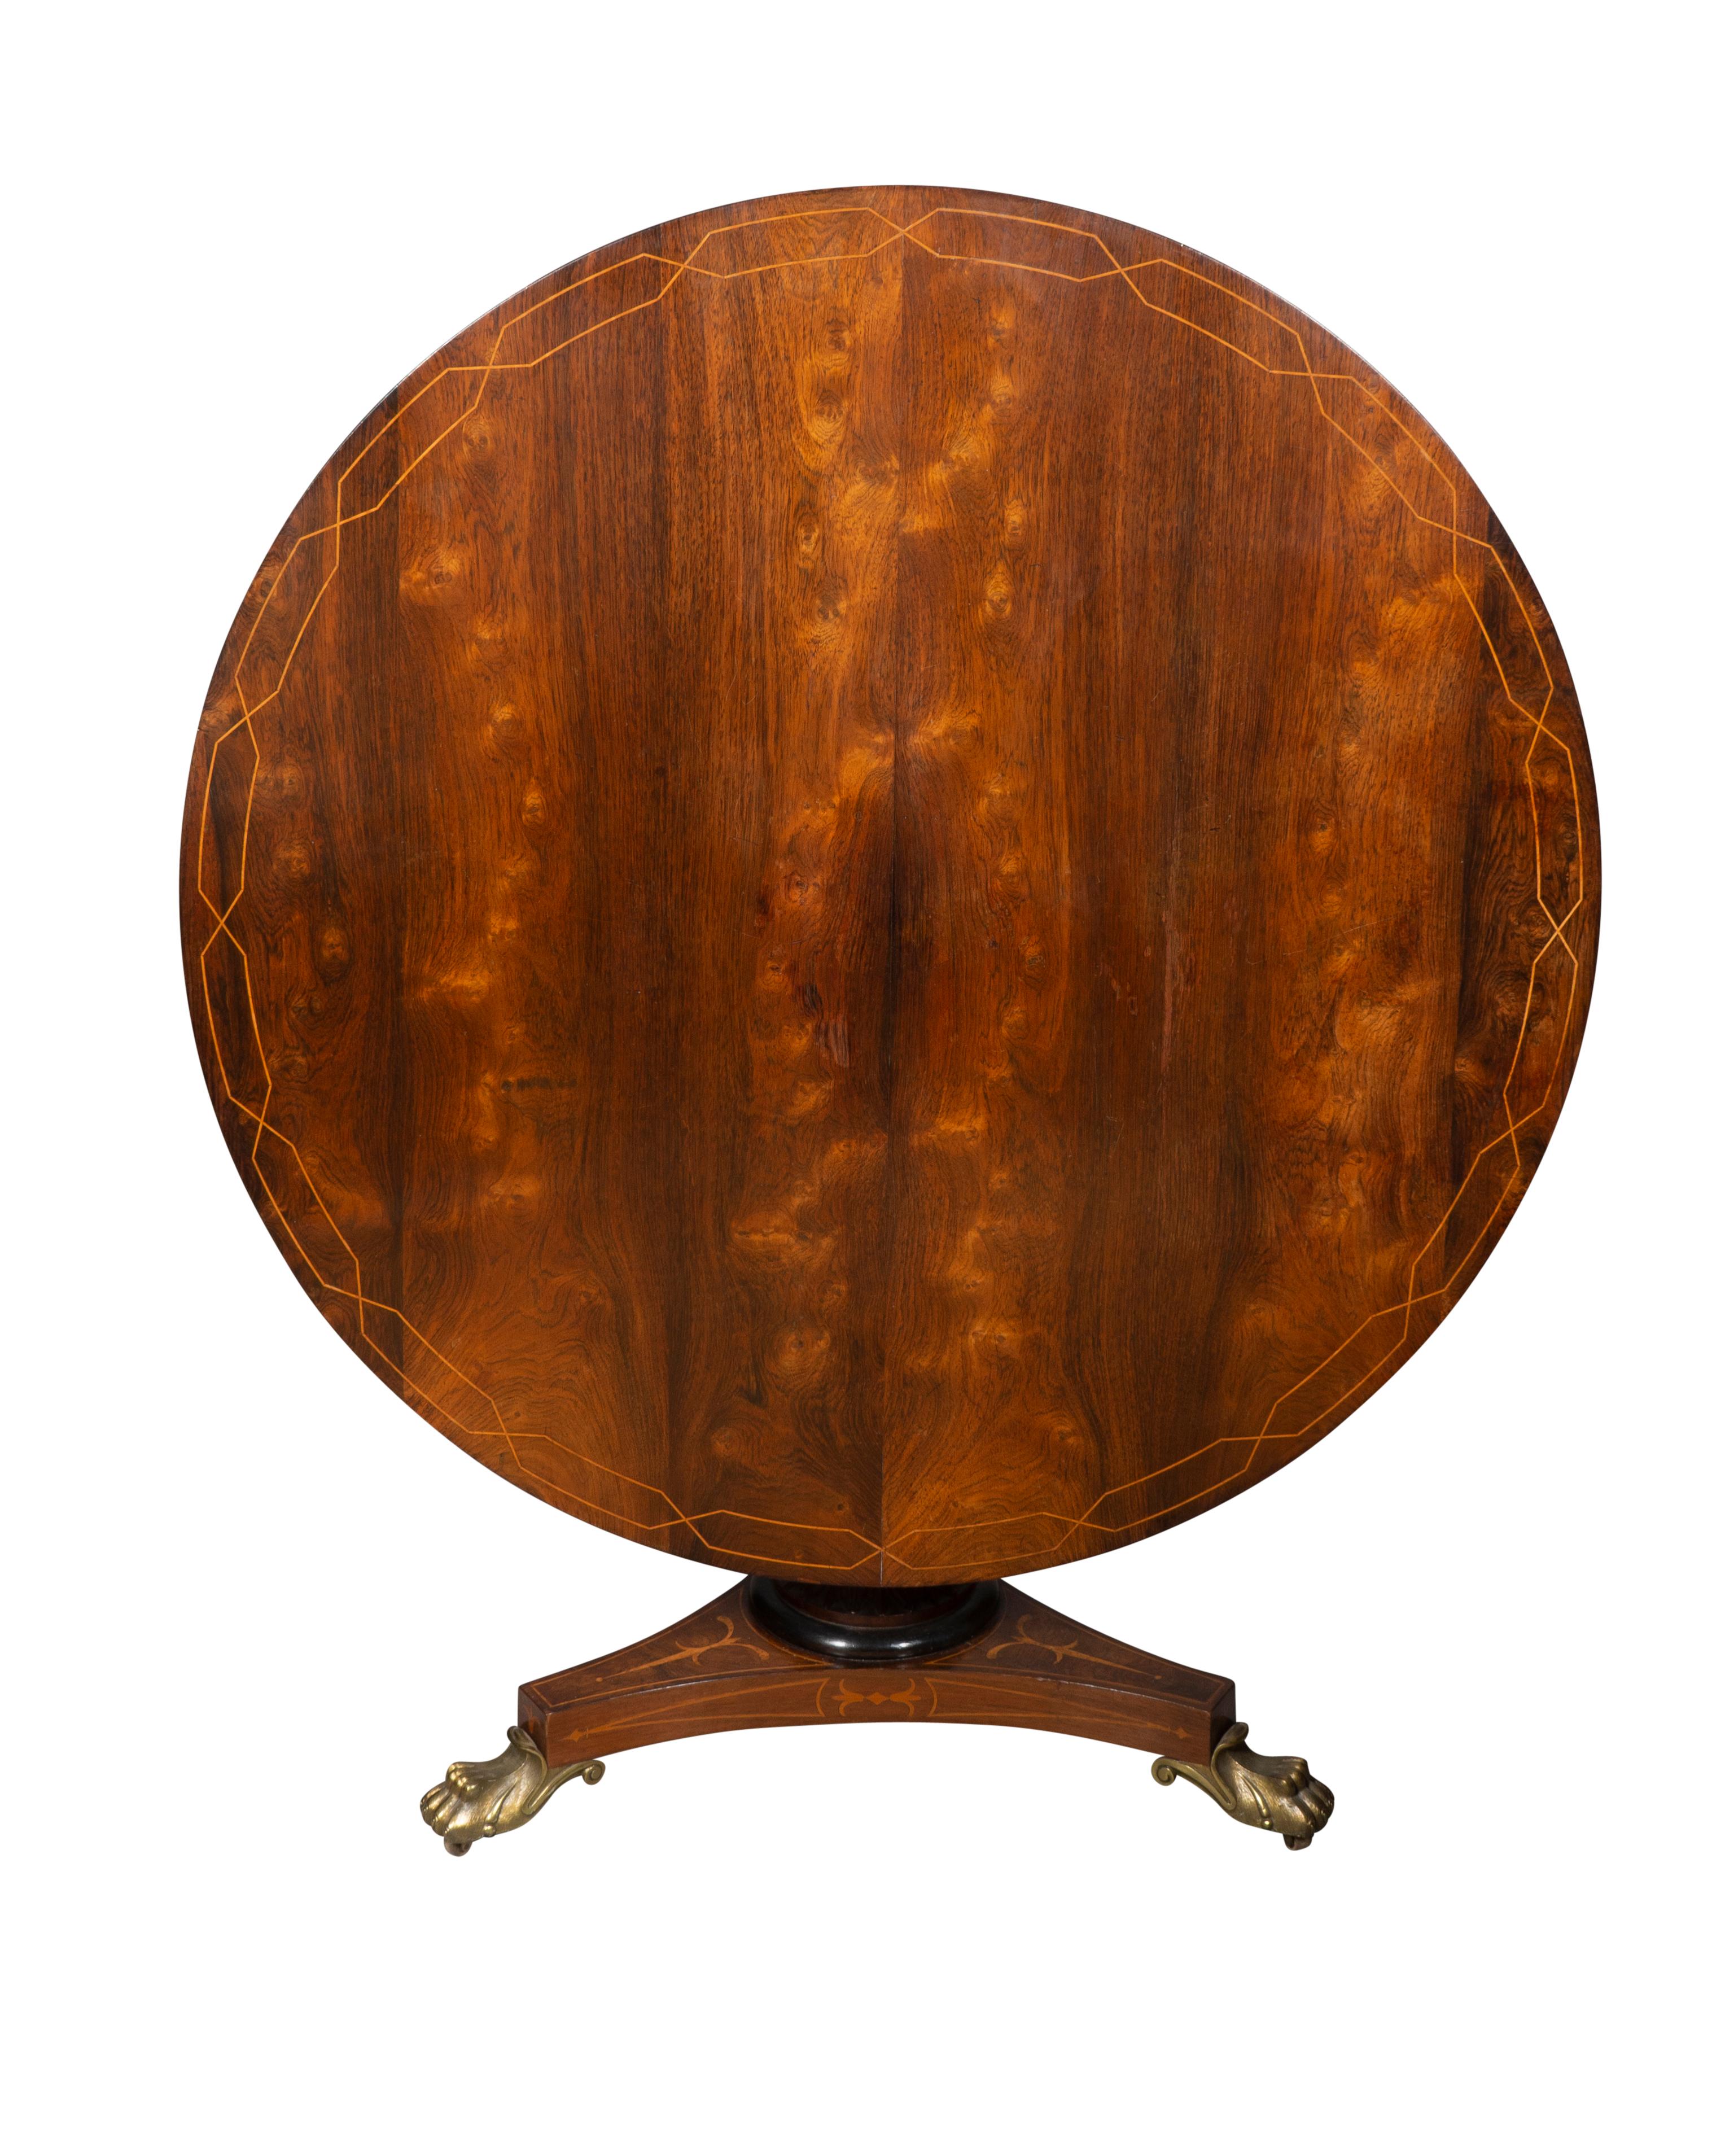 Hinged circular top with geometric satinwood inlaid border and apron. All on a circular spiral carved tapered support joining a tripartite inlaid plinth base with brass paw feet.